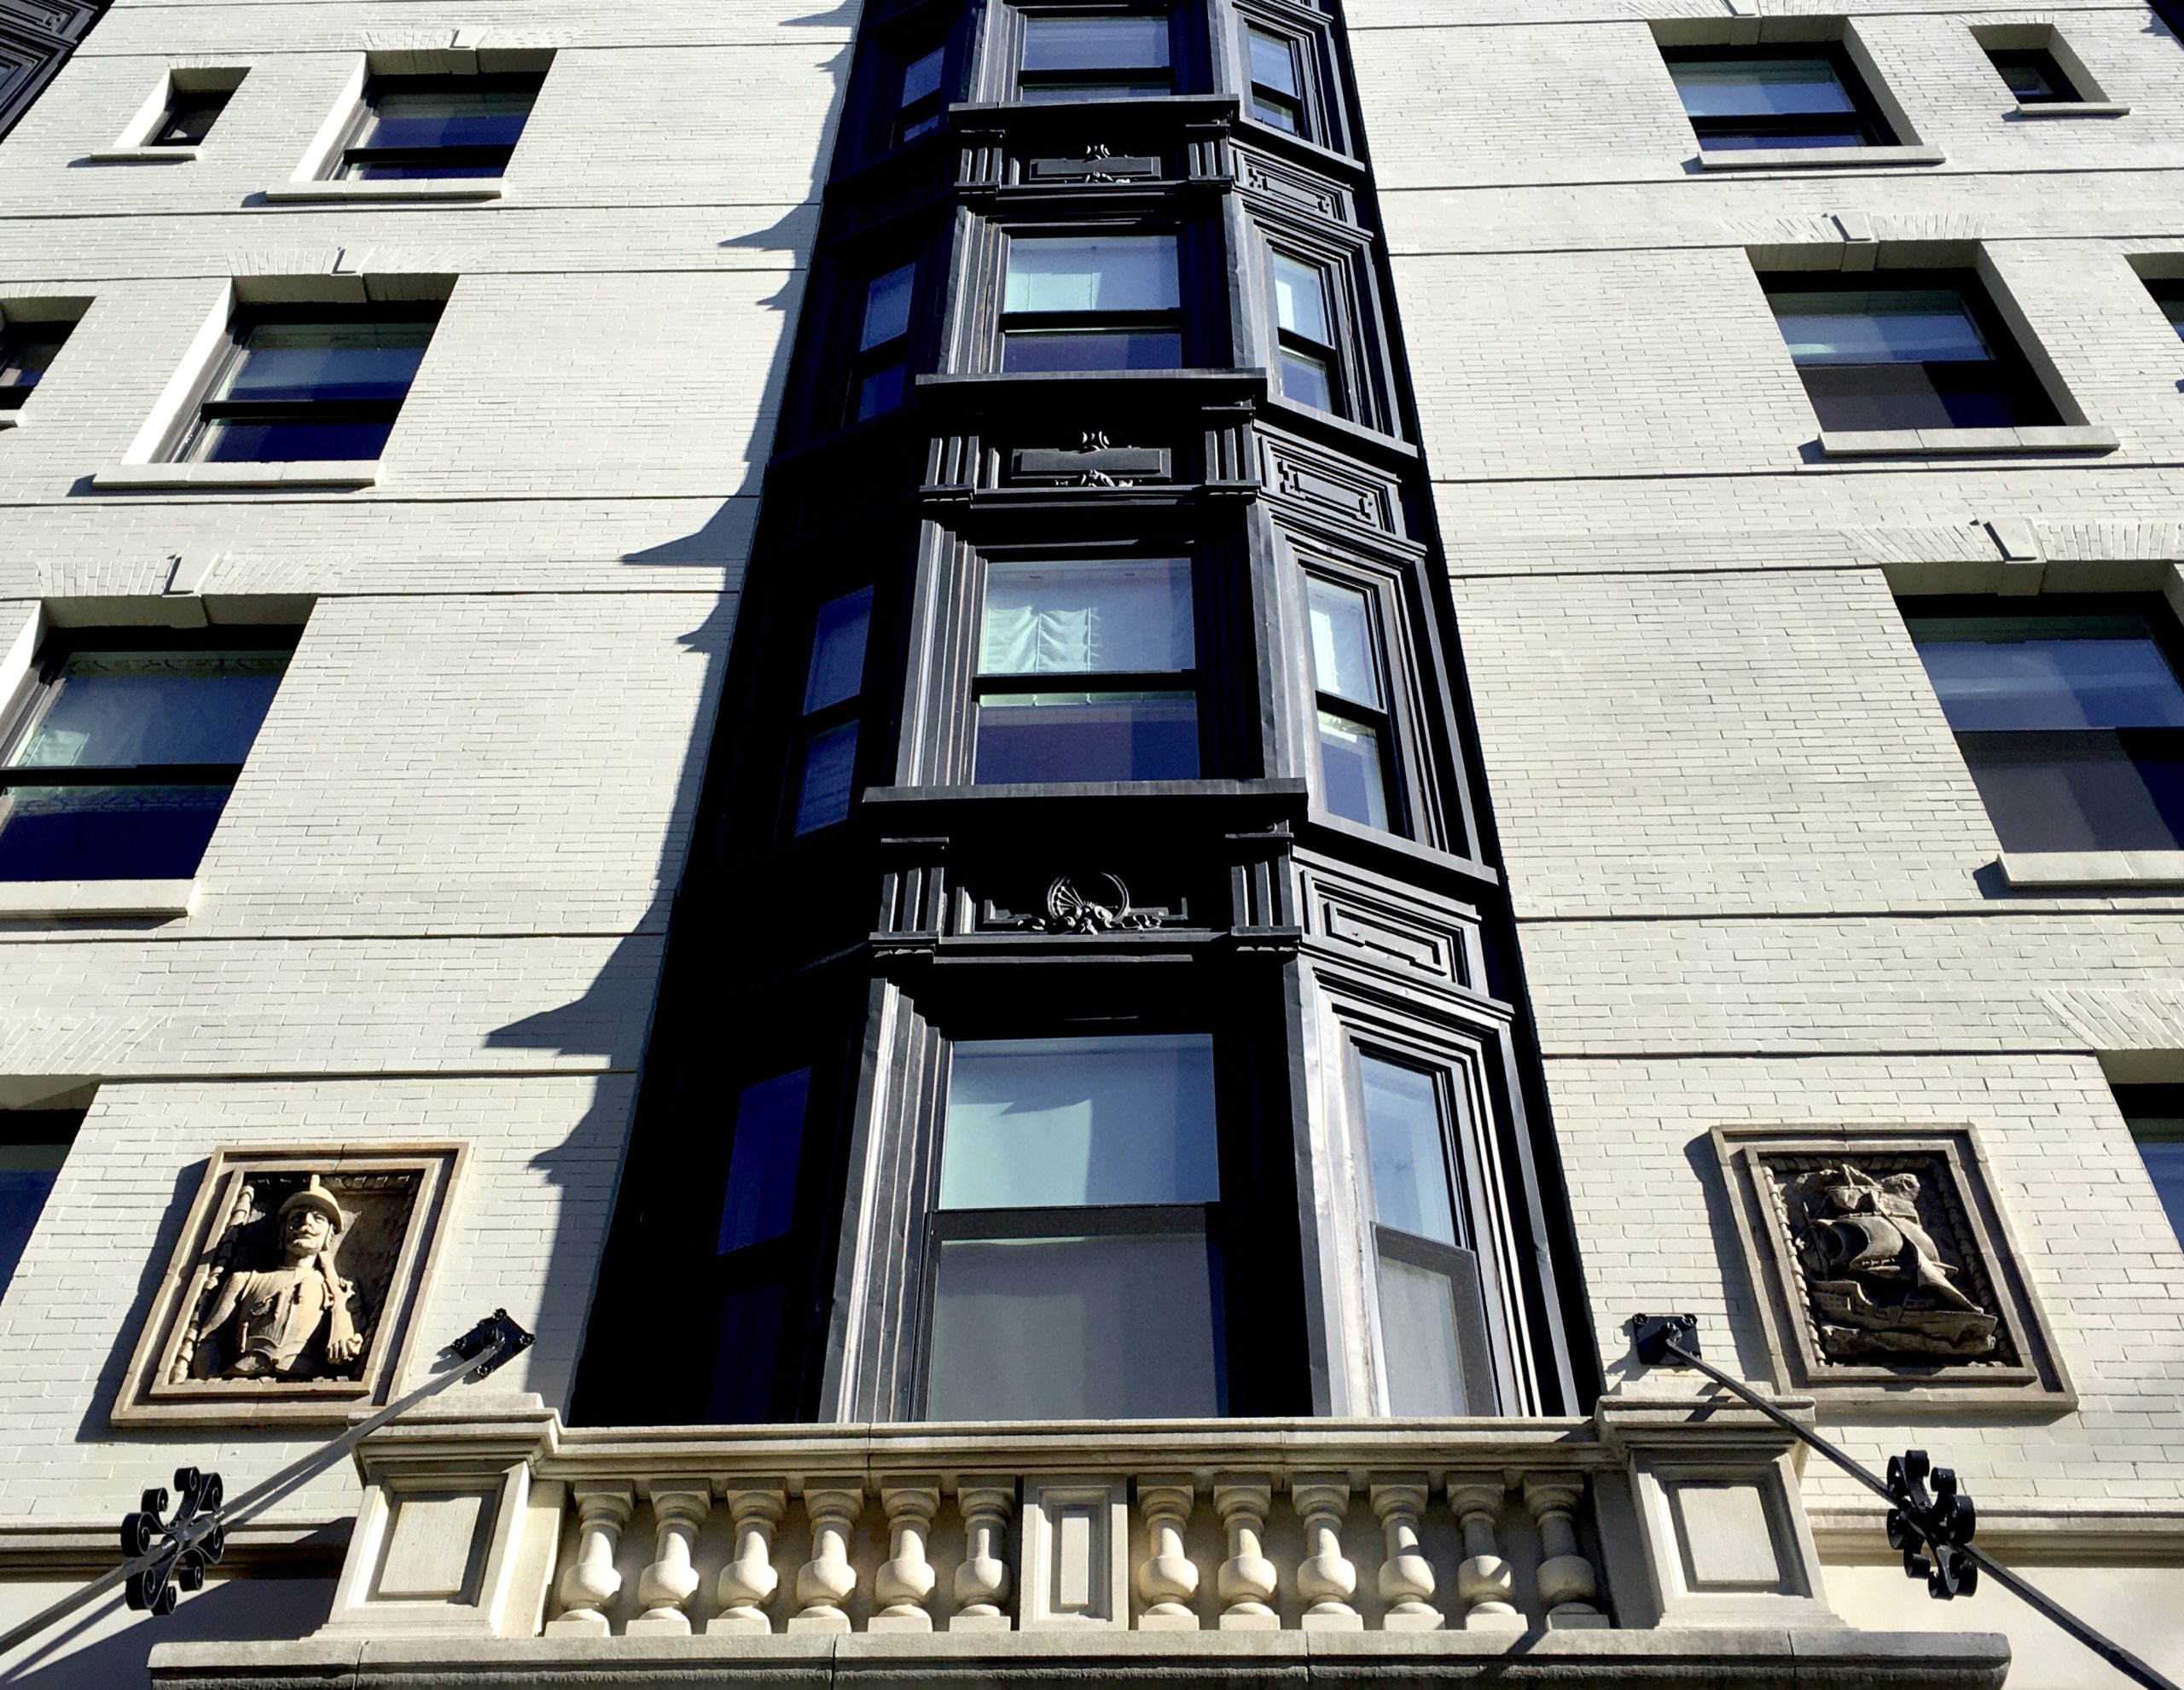 Here’s the facade of the Standish, where Matt Damon reportedly owns the penthouse. Photo: Lore Croghan/Brooklyn Eagle